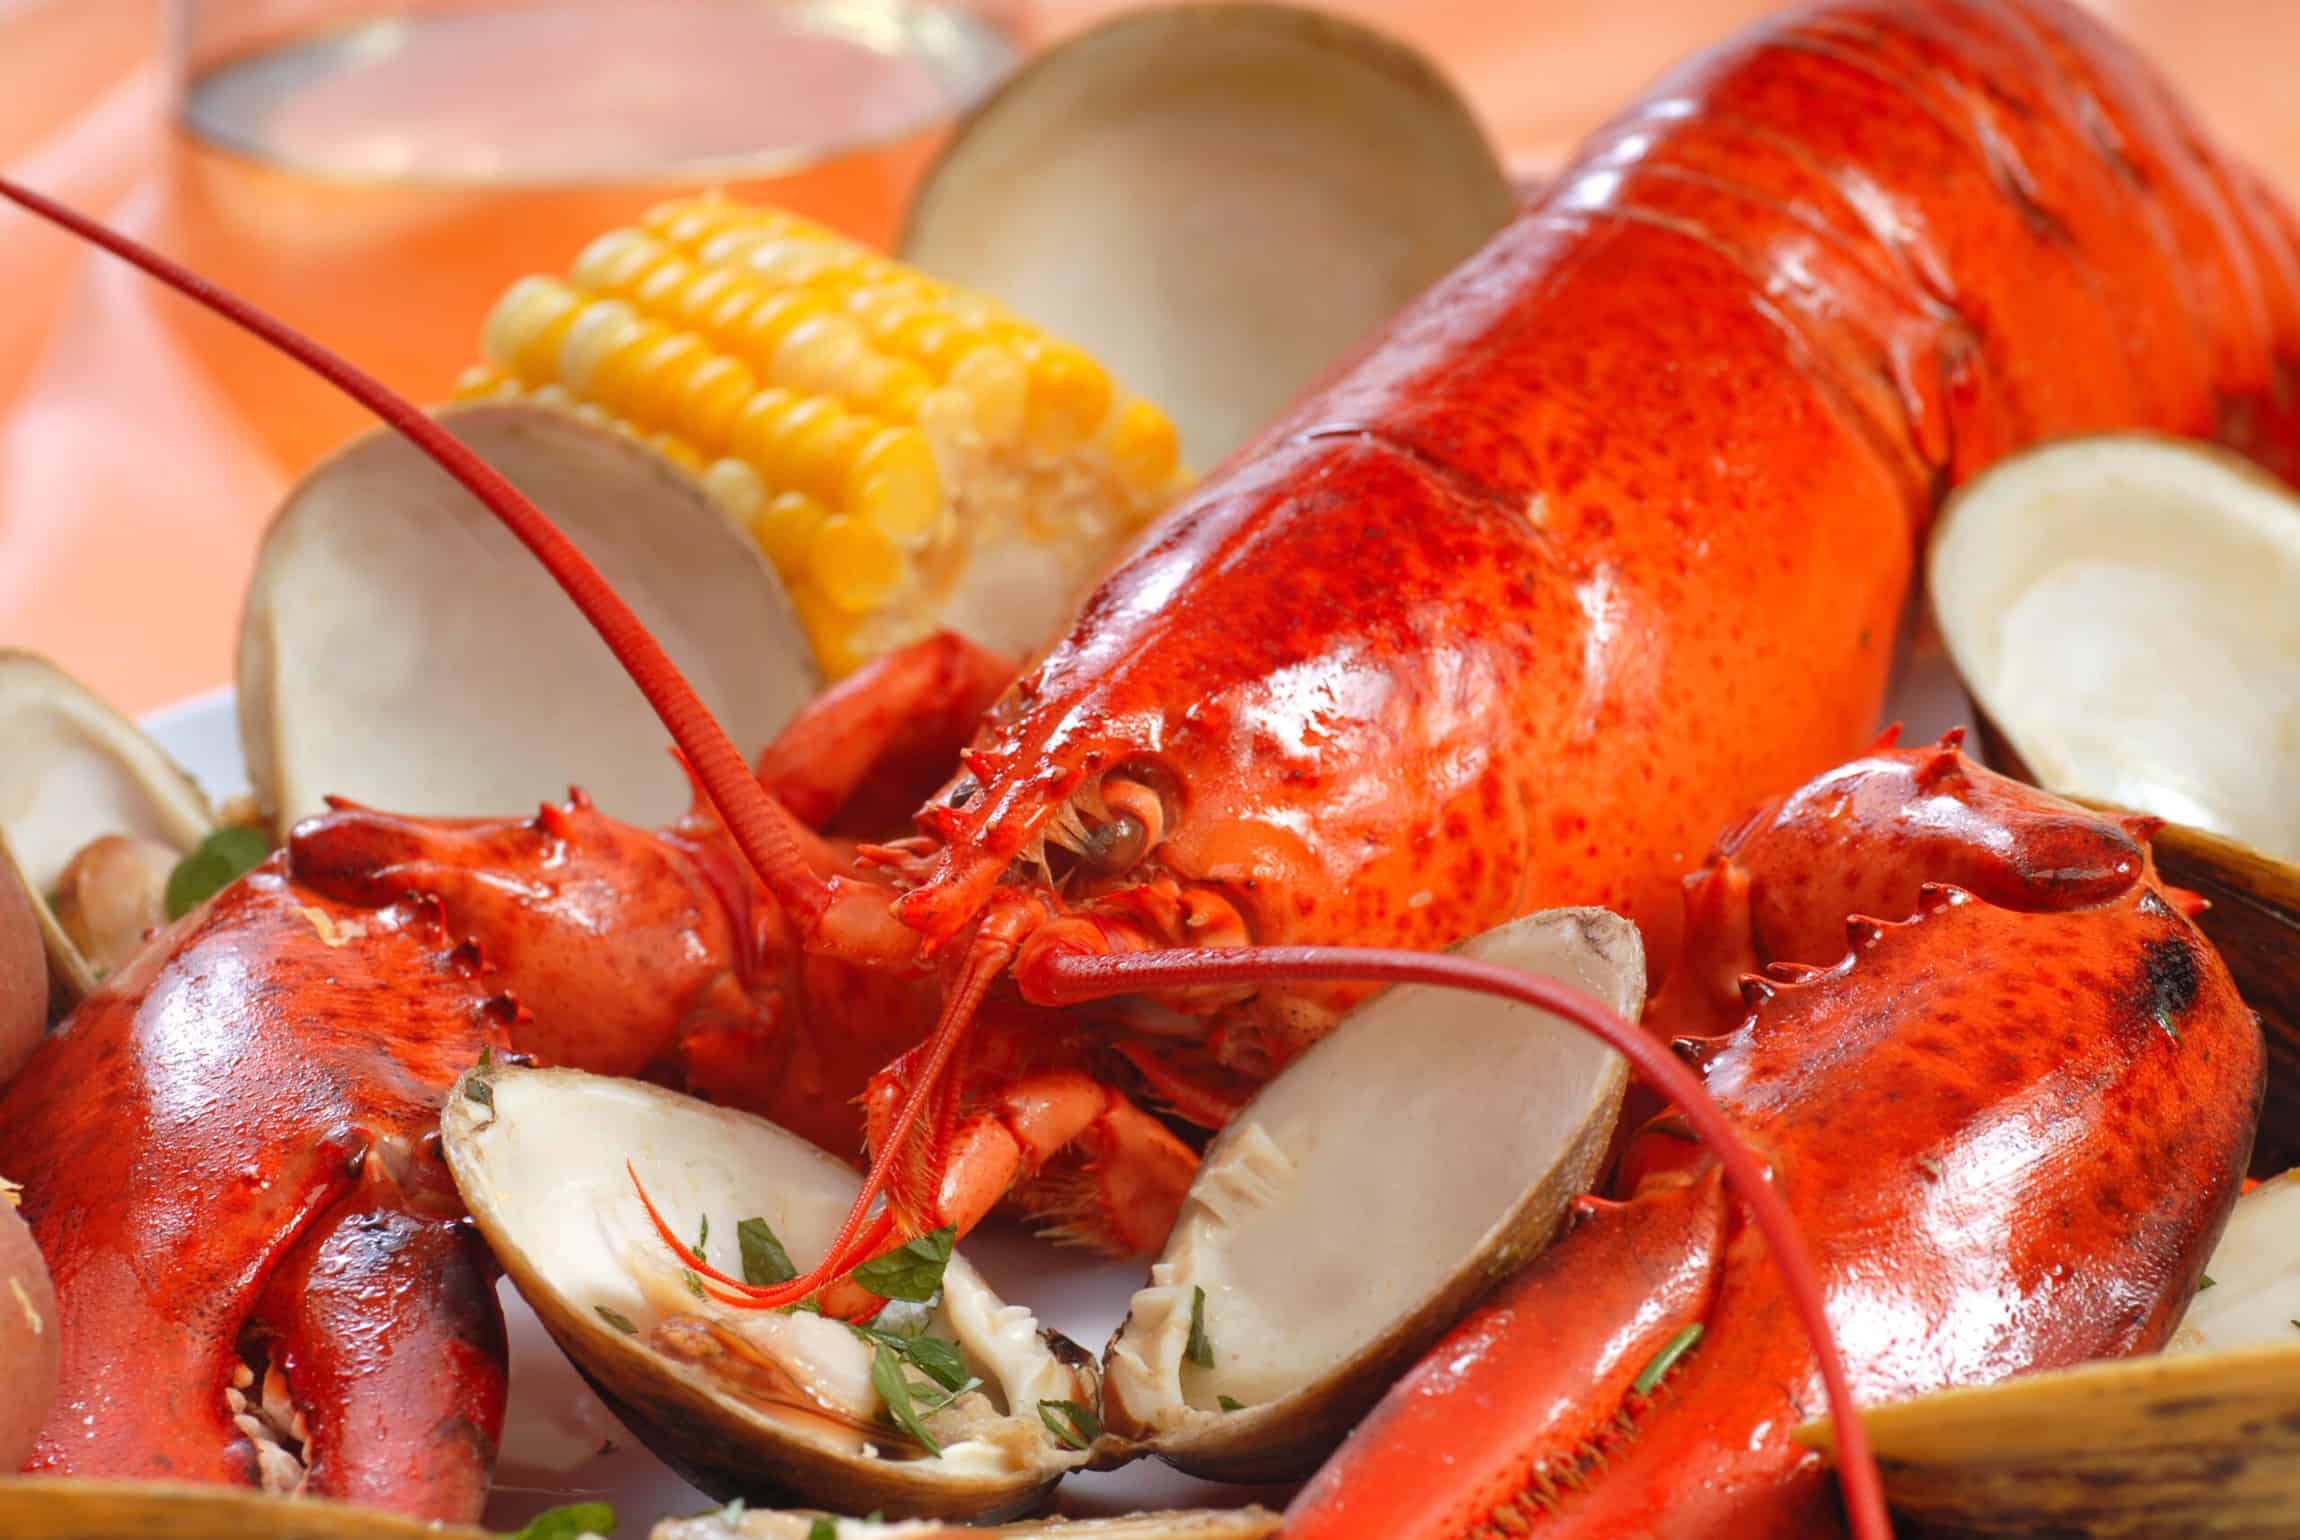 Boiled lobster dinner with clams and corn